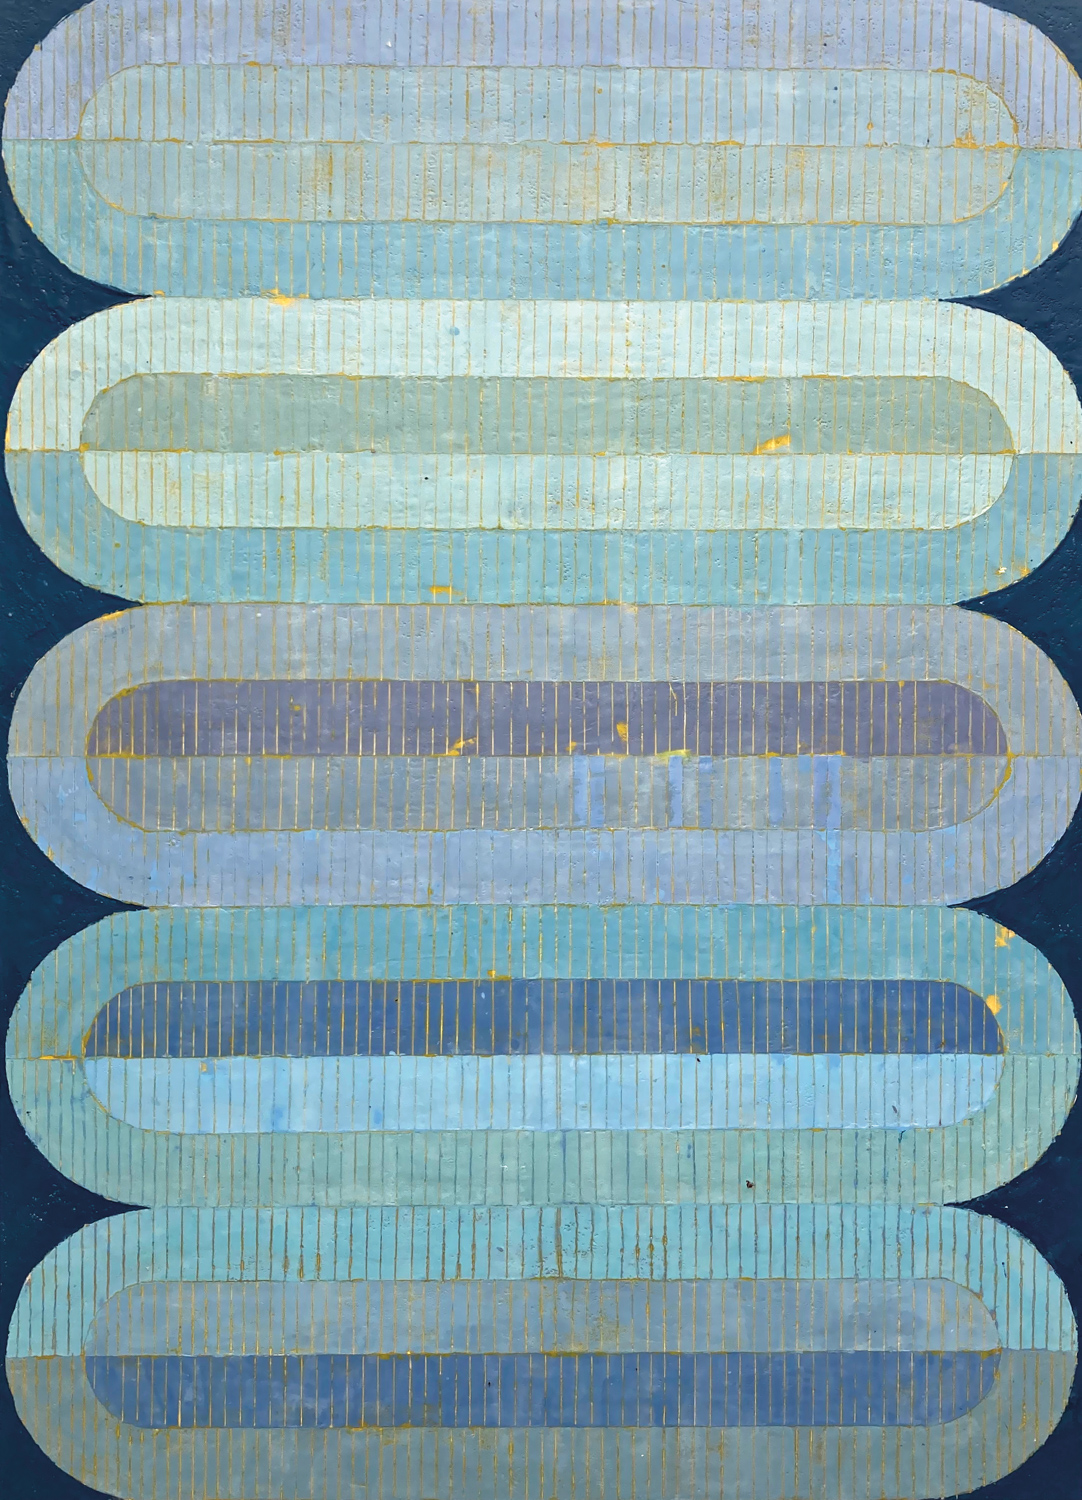 Abstract encaustic artwork depicting stacked ovals in shades of blue.